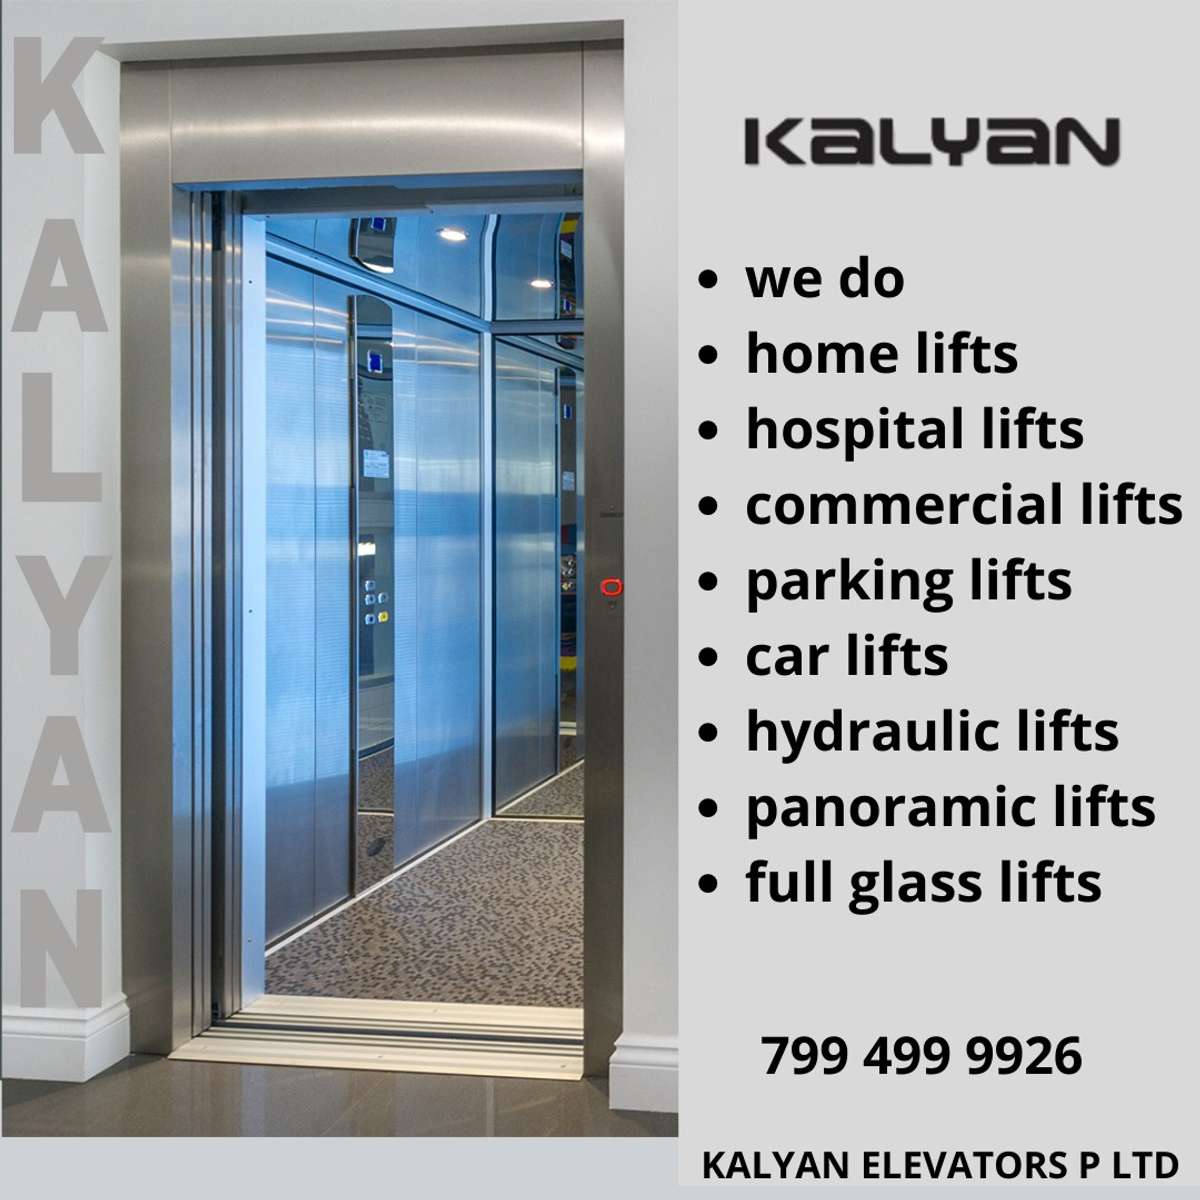 Kalyan Home Elevators offers the long-awaited solution to vertical mobility within homes at affordable prices and easy-to-use features. Our customized and aesthetically designed home lifts are easily installable in preexisting homes as well as houses under construction, and help you relieve the headache of climbing. More details:- 